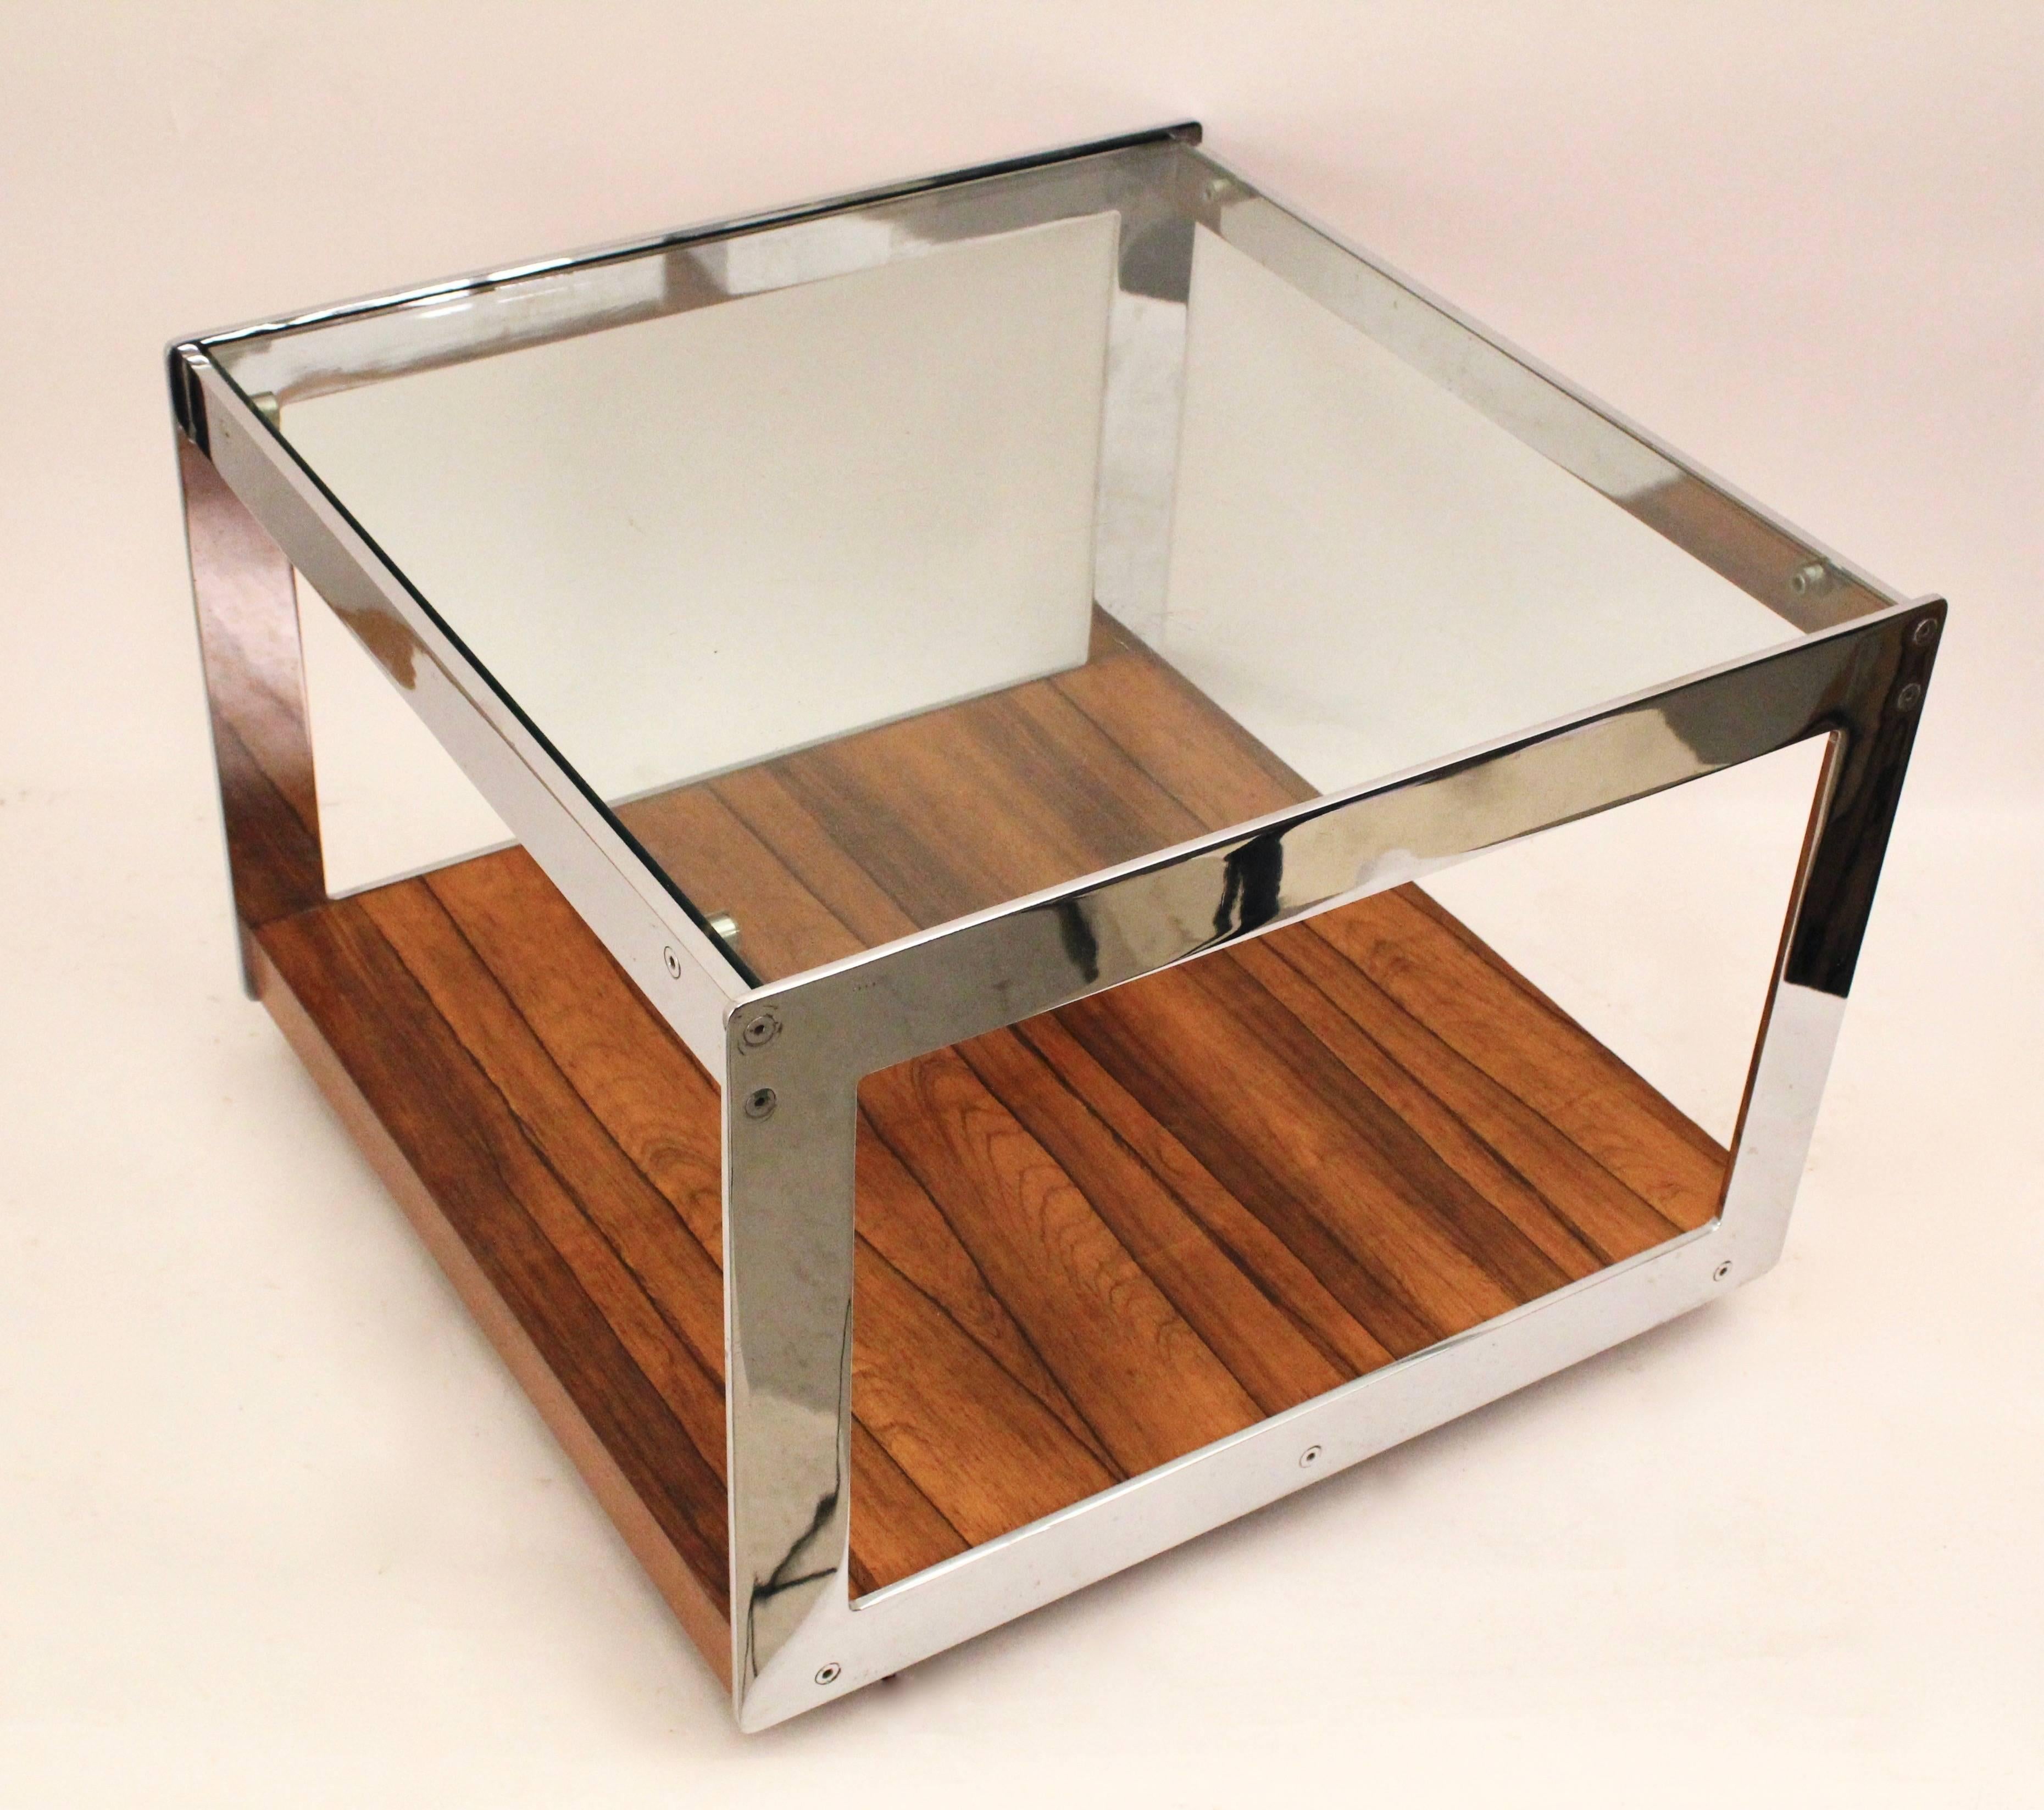 A pair of square chrome coffee tables by Merrow Associates, with a simple sledge style base, circa 1970. The top consisting of a clear glass panel, supported by a chrome frame, with the bases in a contrasting rosewood. Each table on its original